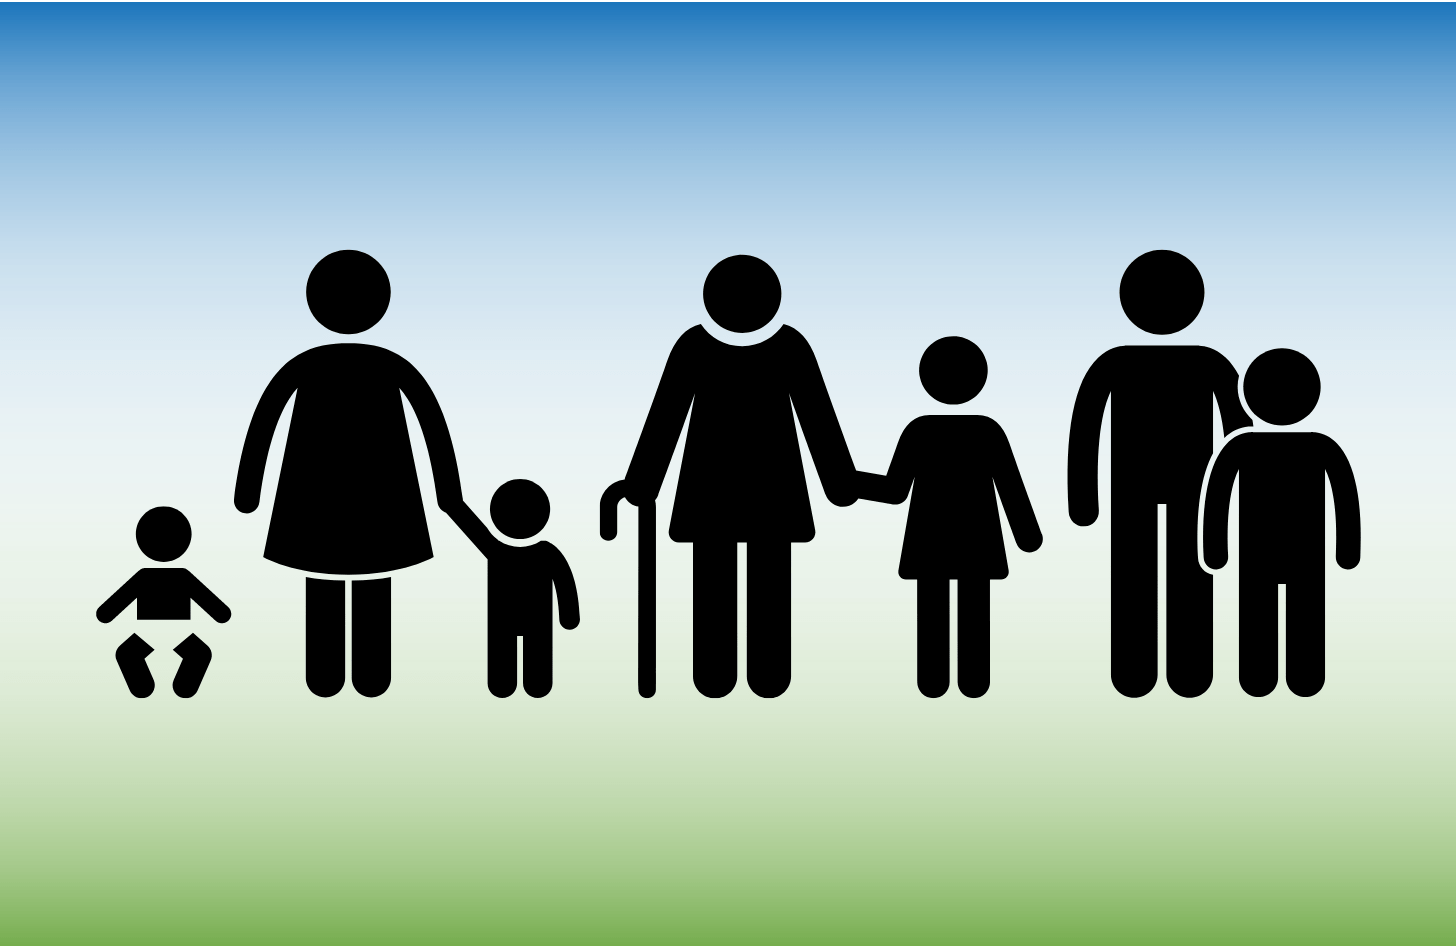 Stick figure icons representing various age groups set against a blue and green background